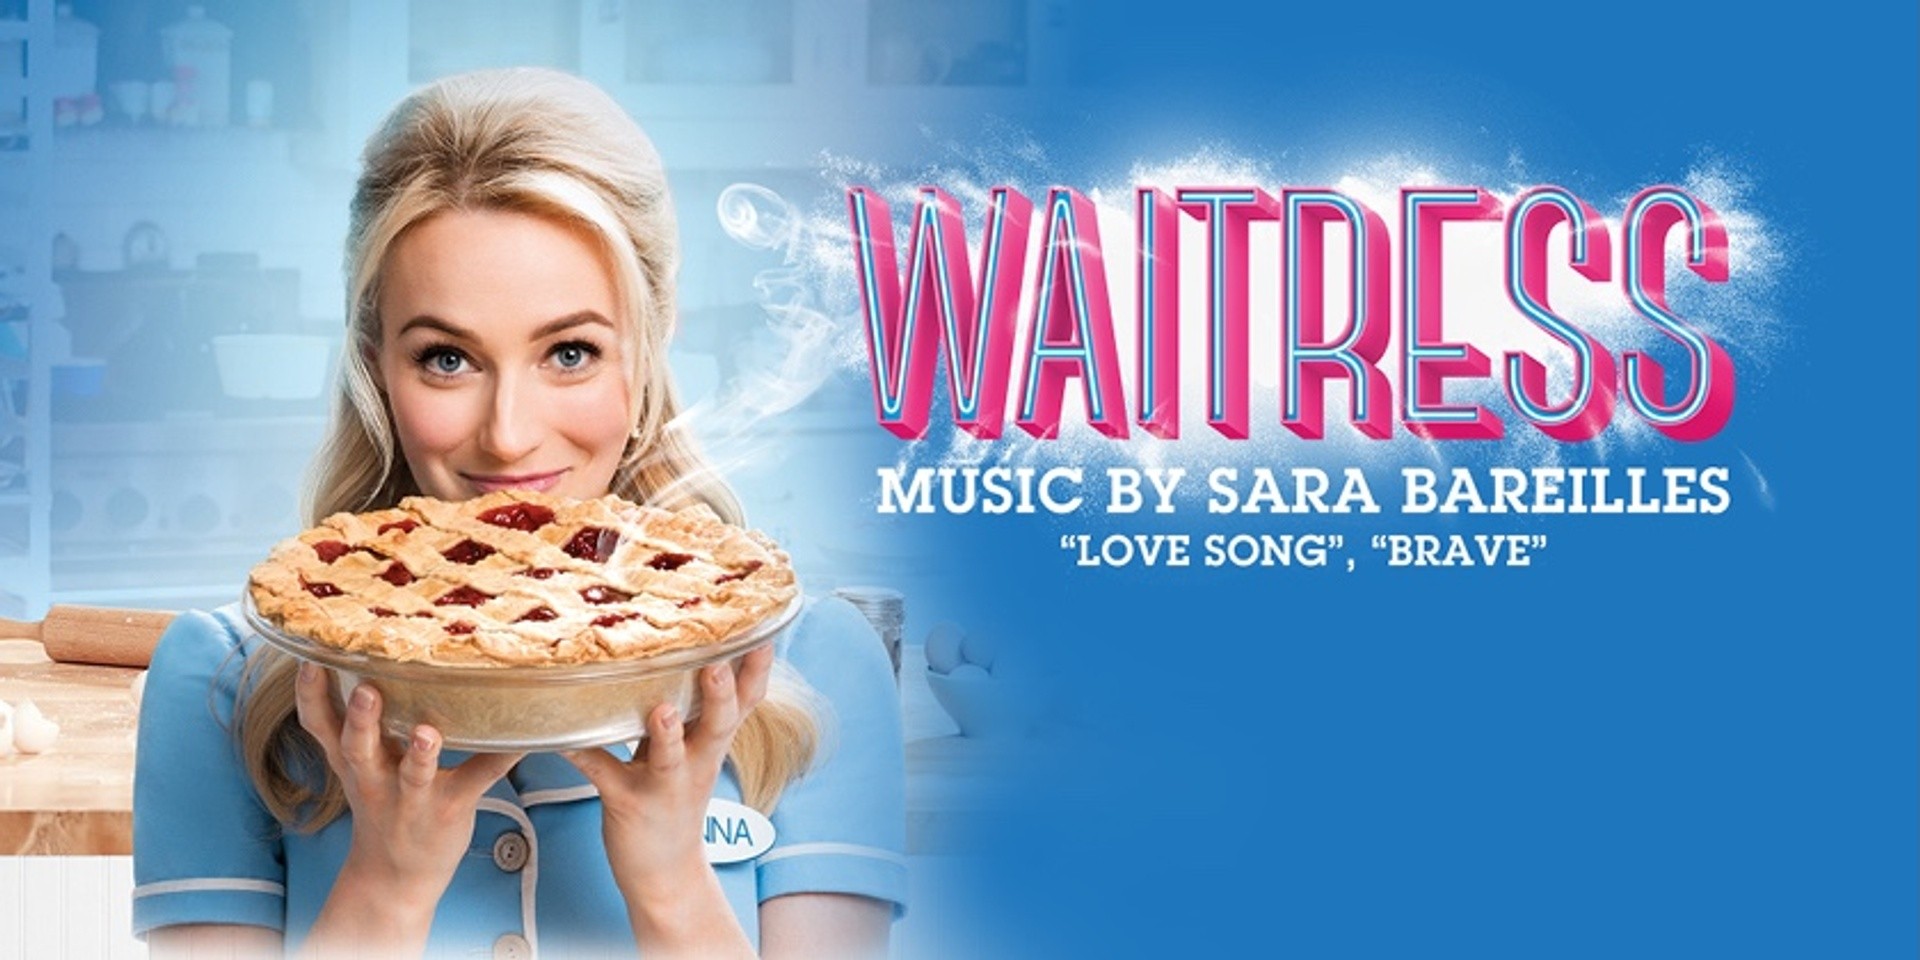 Sara Bareilles's Waitress the Musical is heading to Manila and you can be a part of it!